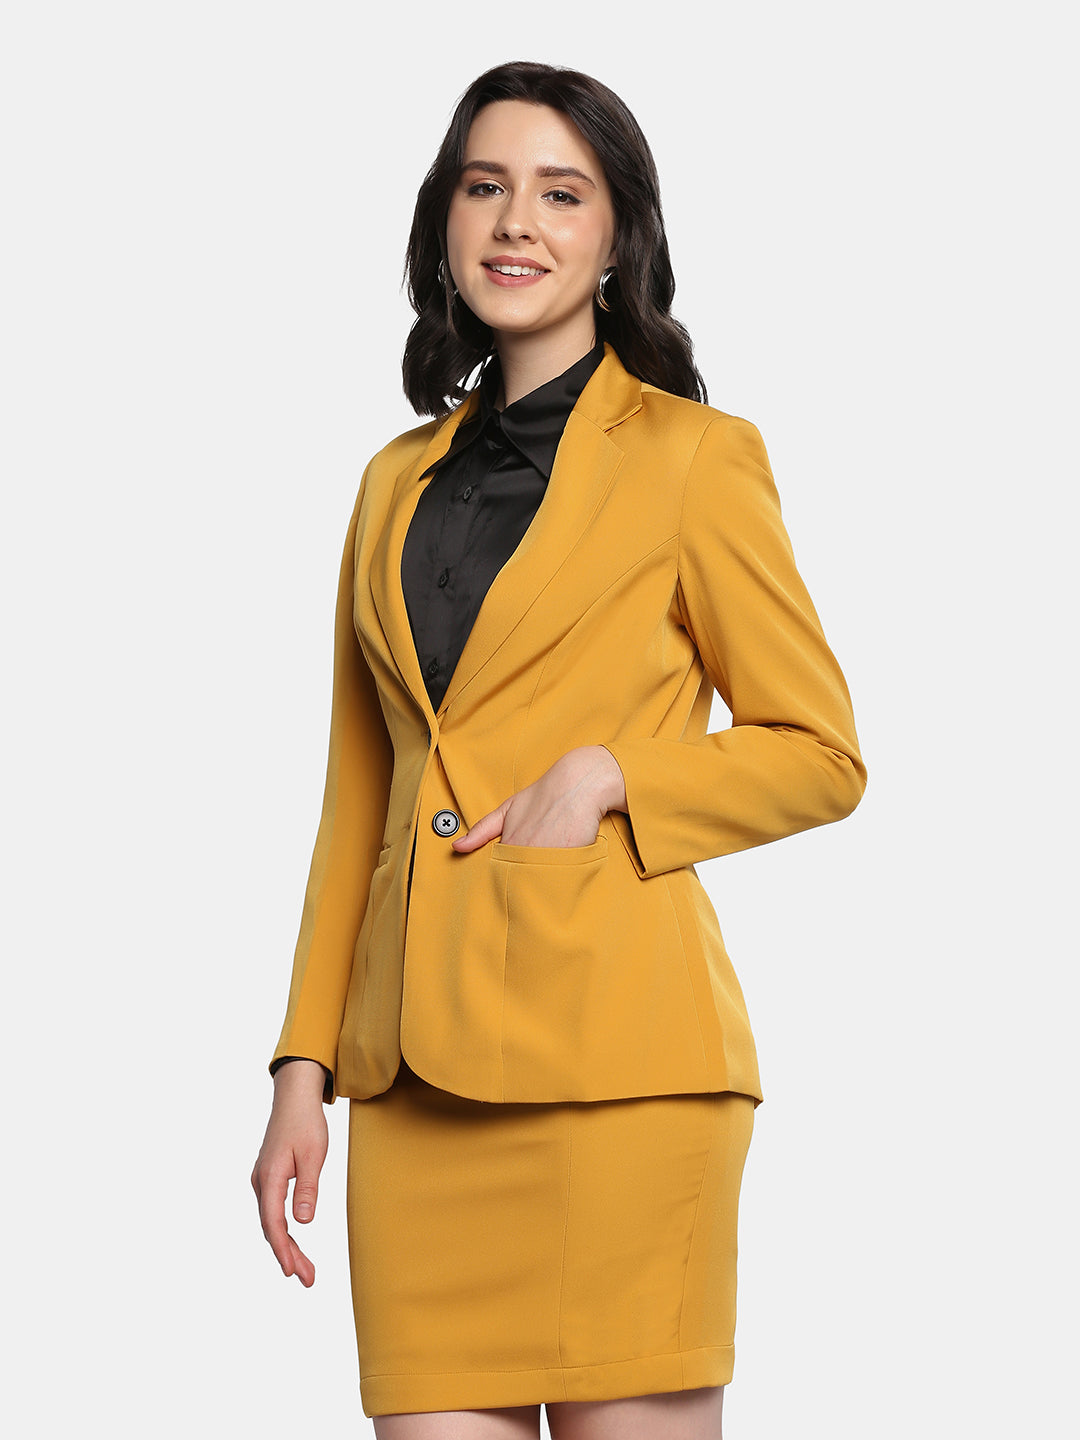 Skirt Suits For Women  Buy Office Clothing online - PowerSutra